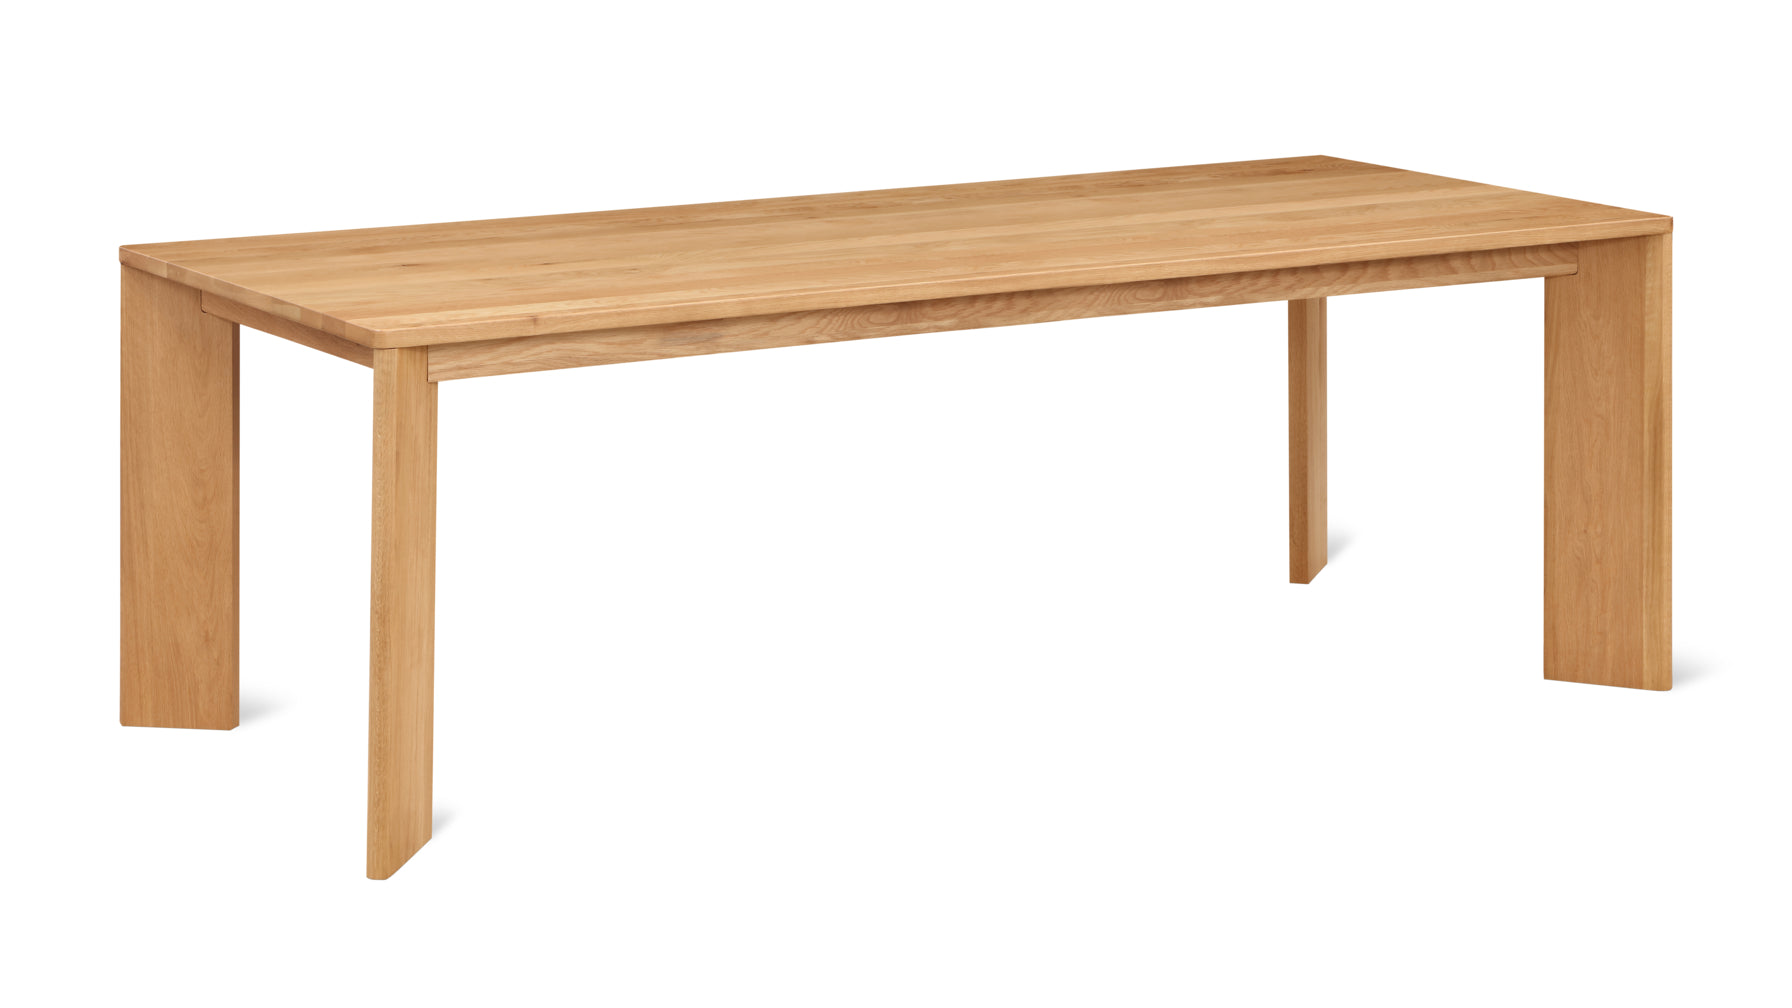 Frame Dining Table, Seats 6-8 People, Oak - Image 1